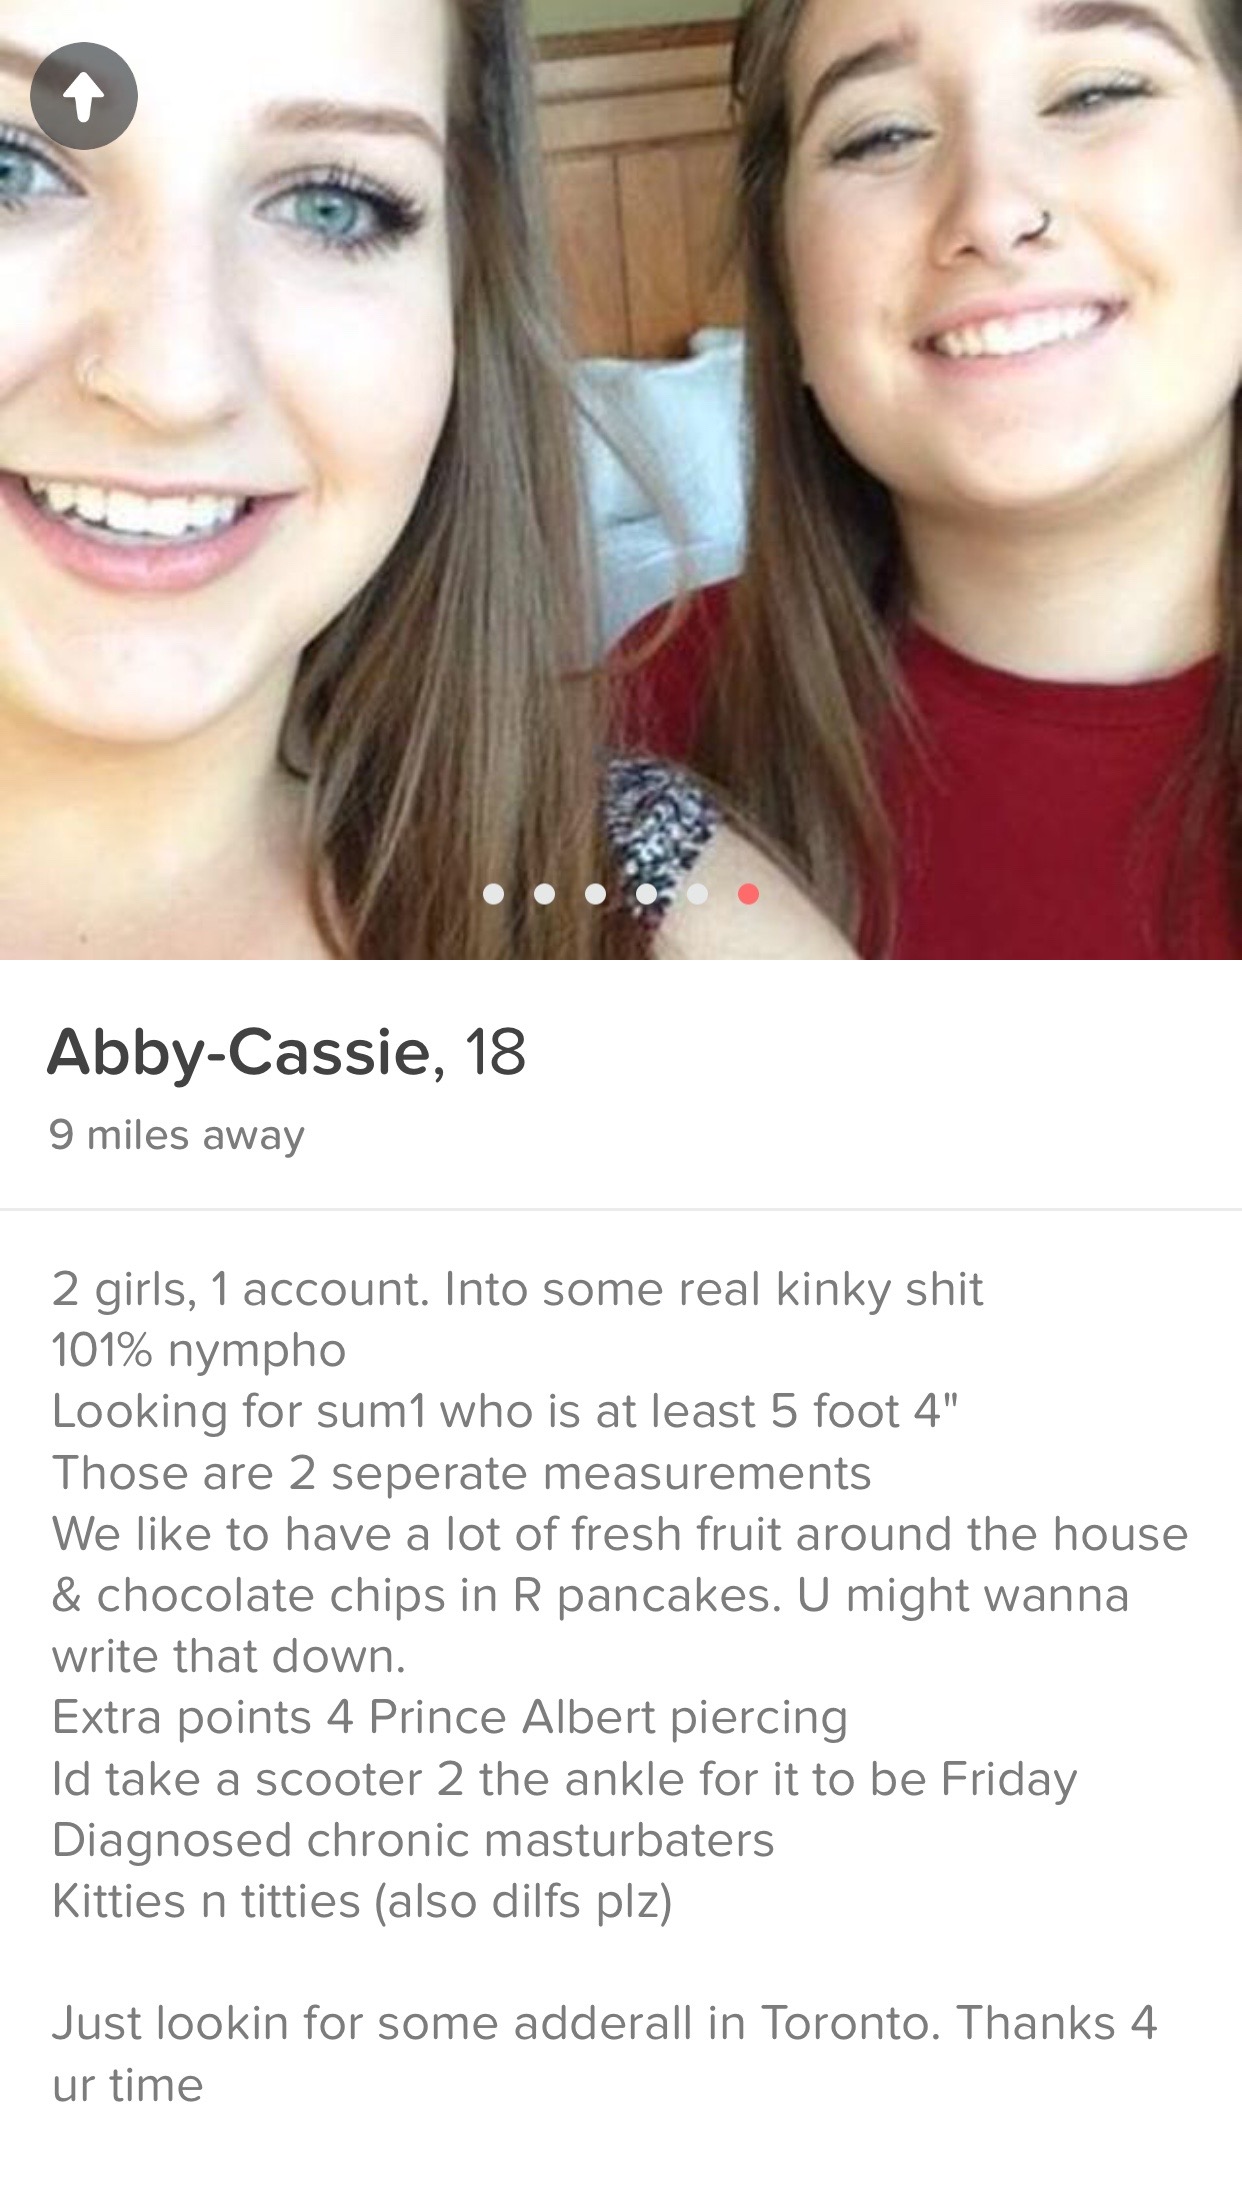 two girls on tinder - AbbyCassie, 18 9 miles away 2 girls, 1 account. Into some real kinky shit 101% nympho Looking for sum1 who is at least 5 foot 4" Those are 2 seperate measurements We to have a lot of fresh fruit around the house & chocolate chips in 